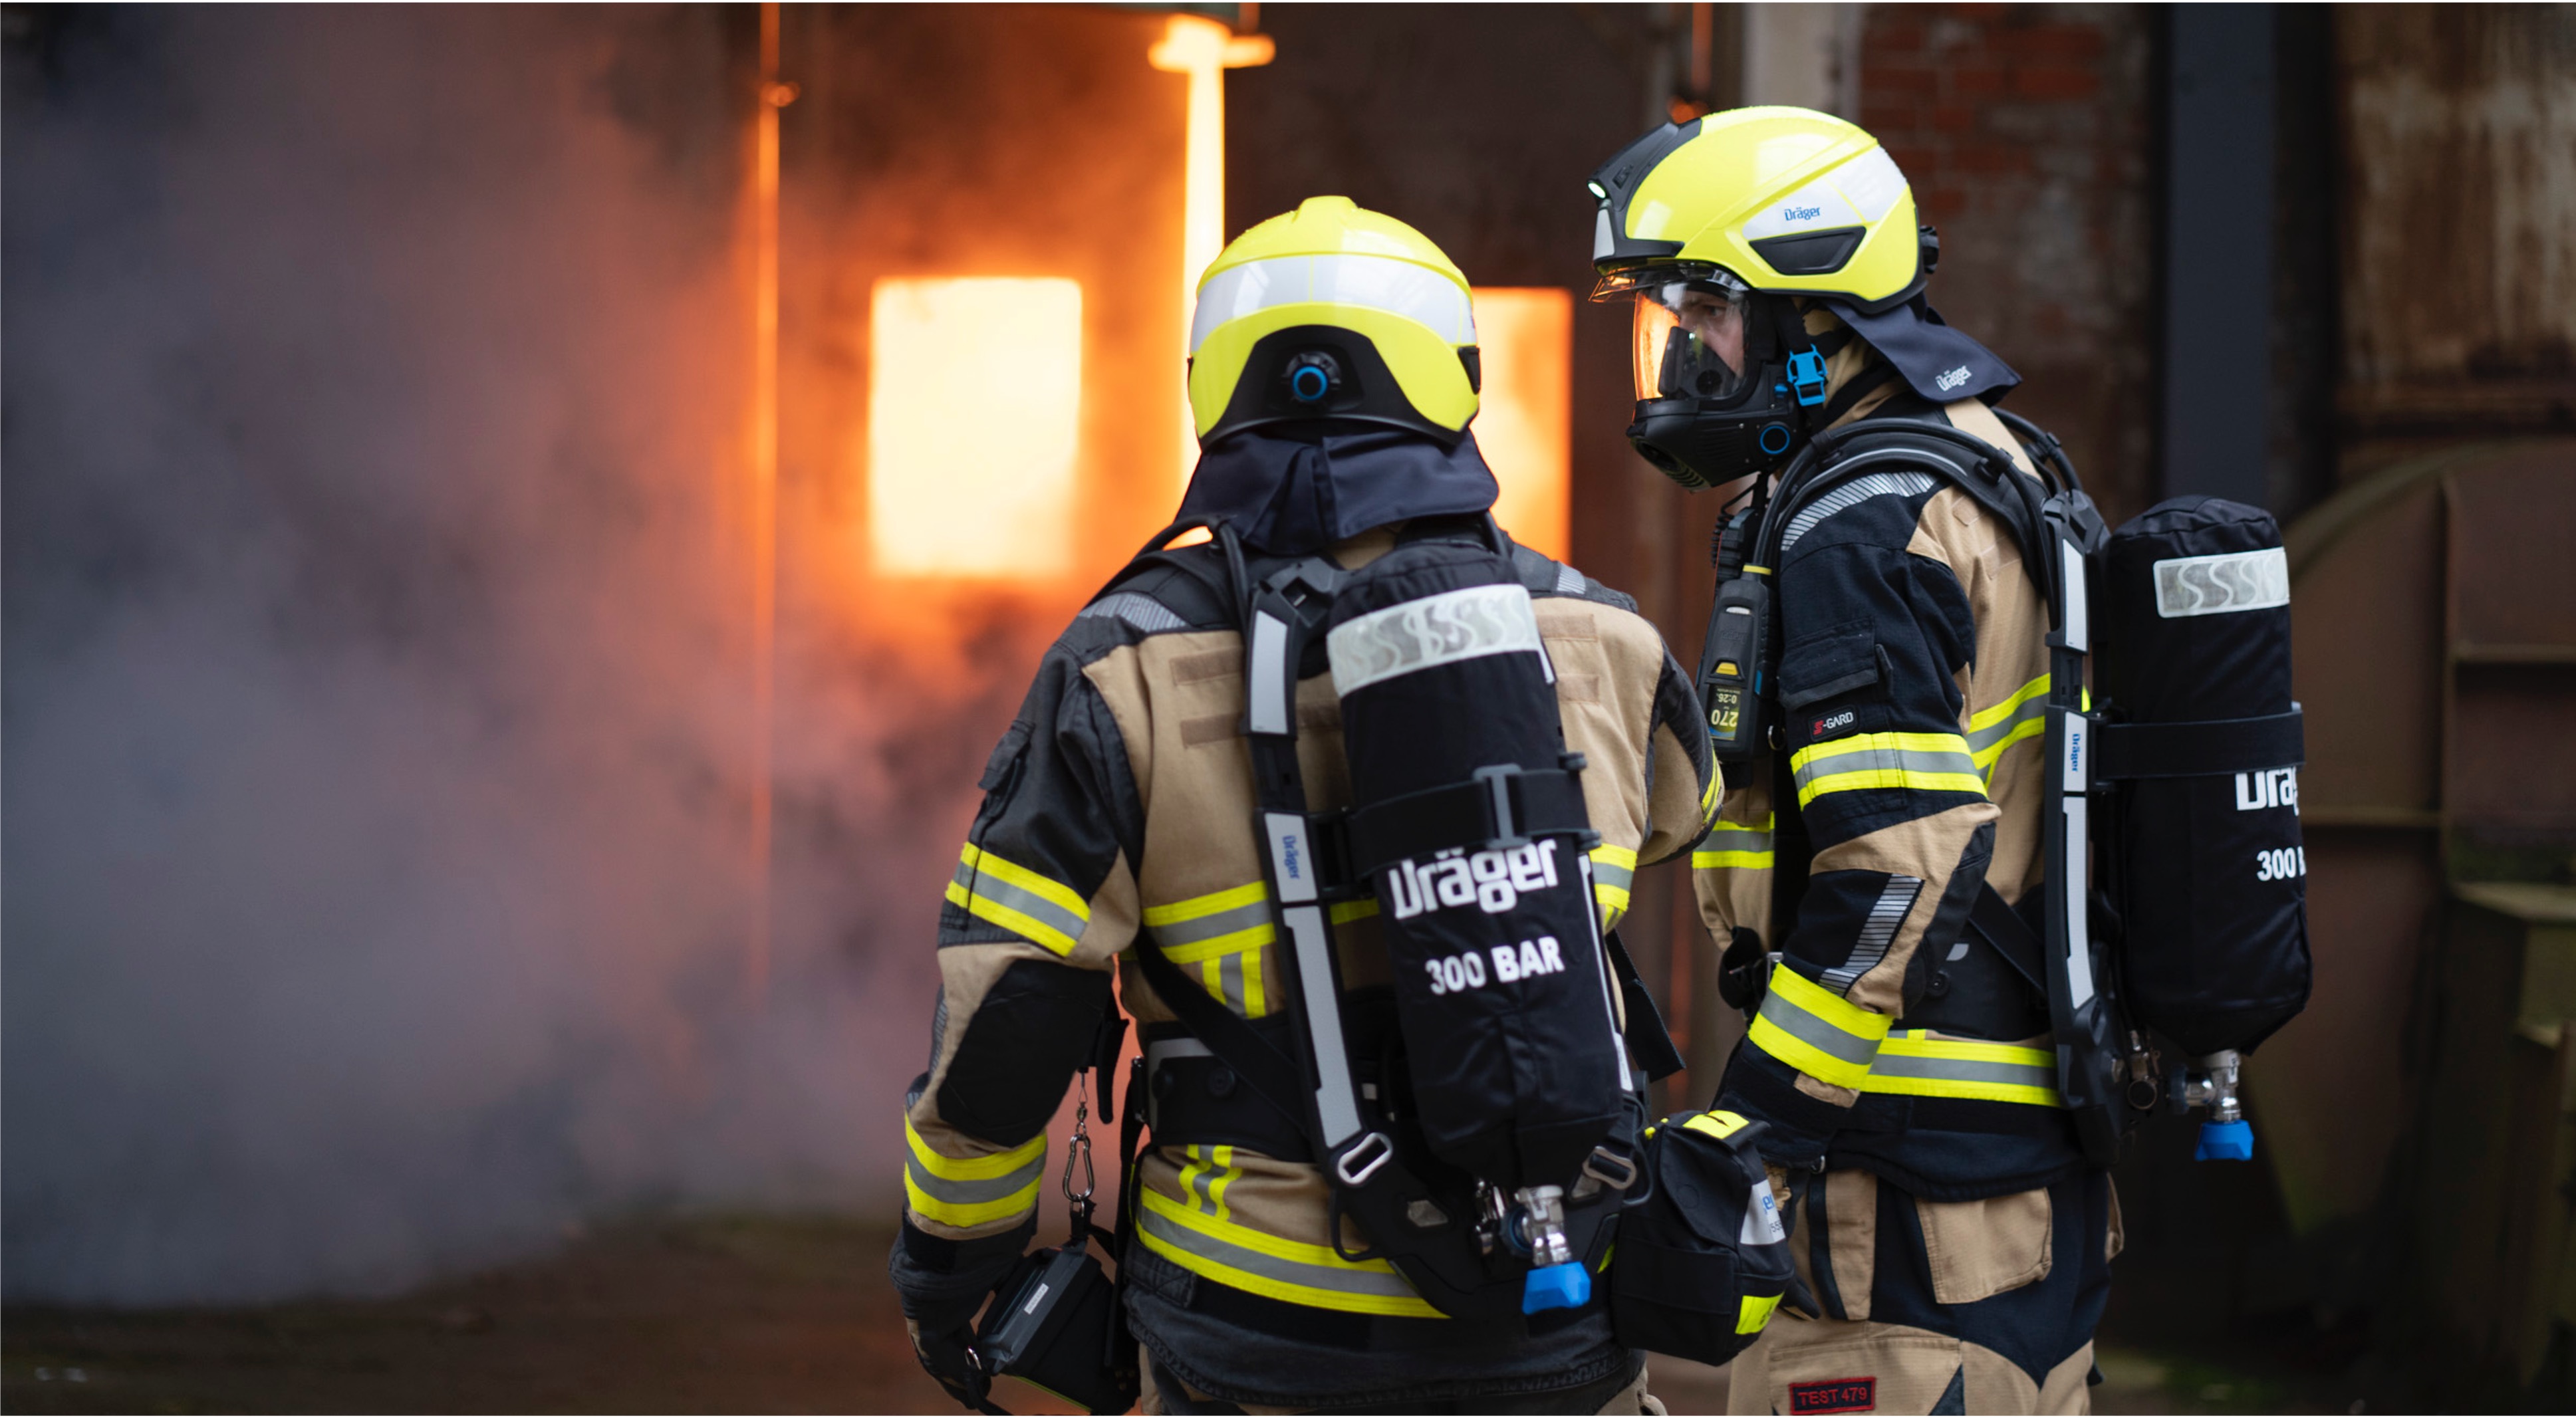 16,000 breathing apparatus with graphene nanotube-enhanced cylinders adopted by firefighter services globally